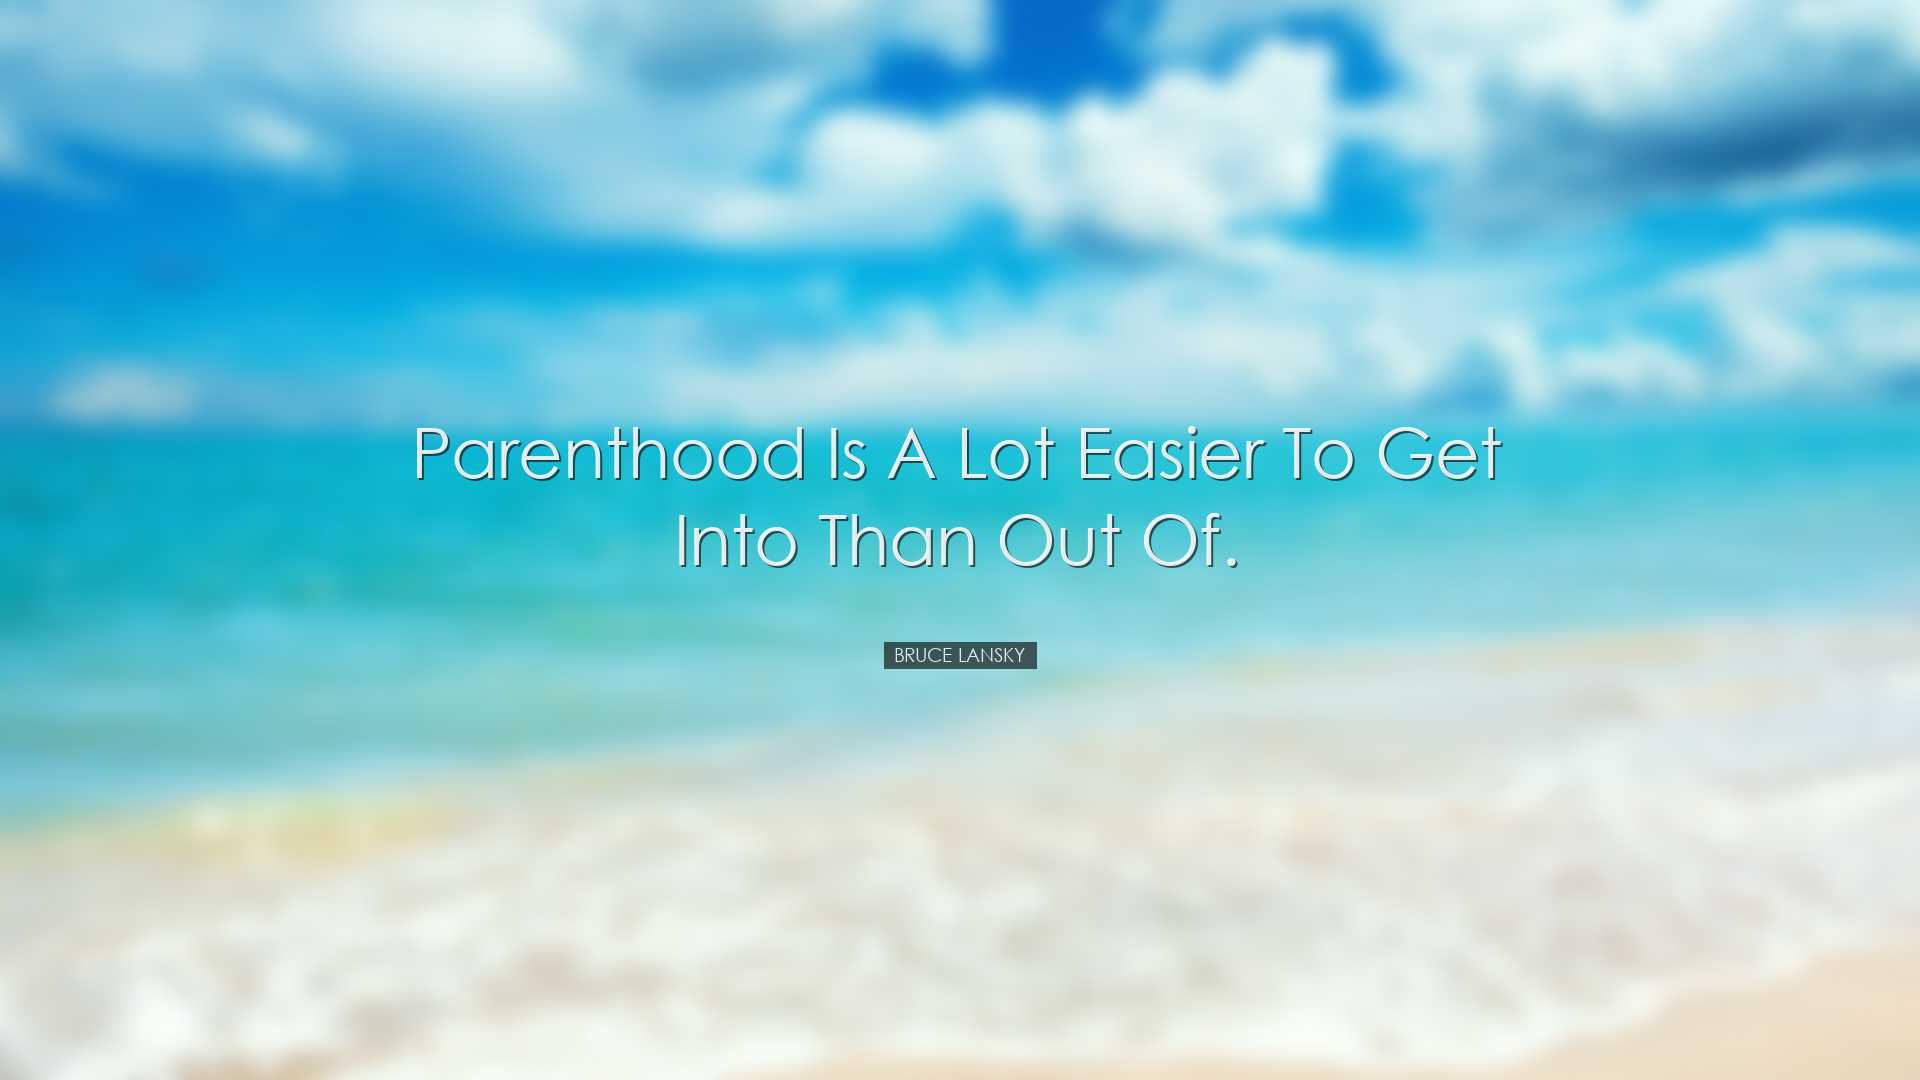 Parenthood is a lot easier to get into than out of. - Bruce Lansky